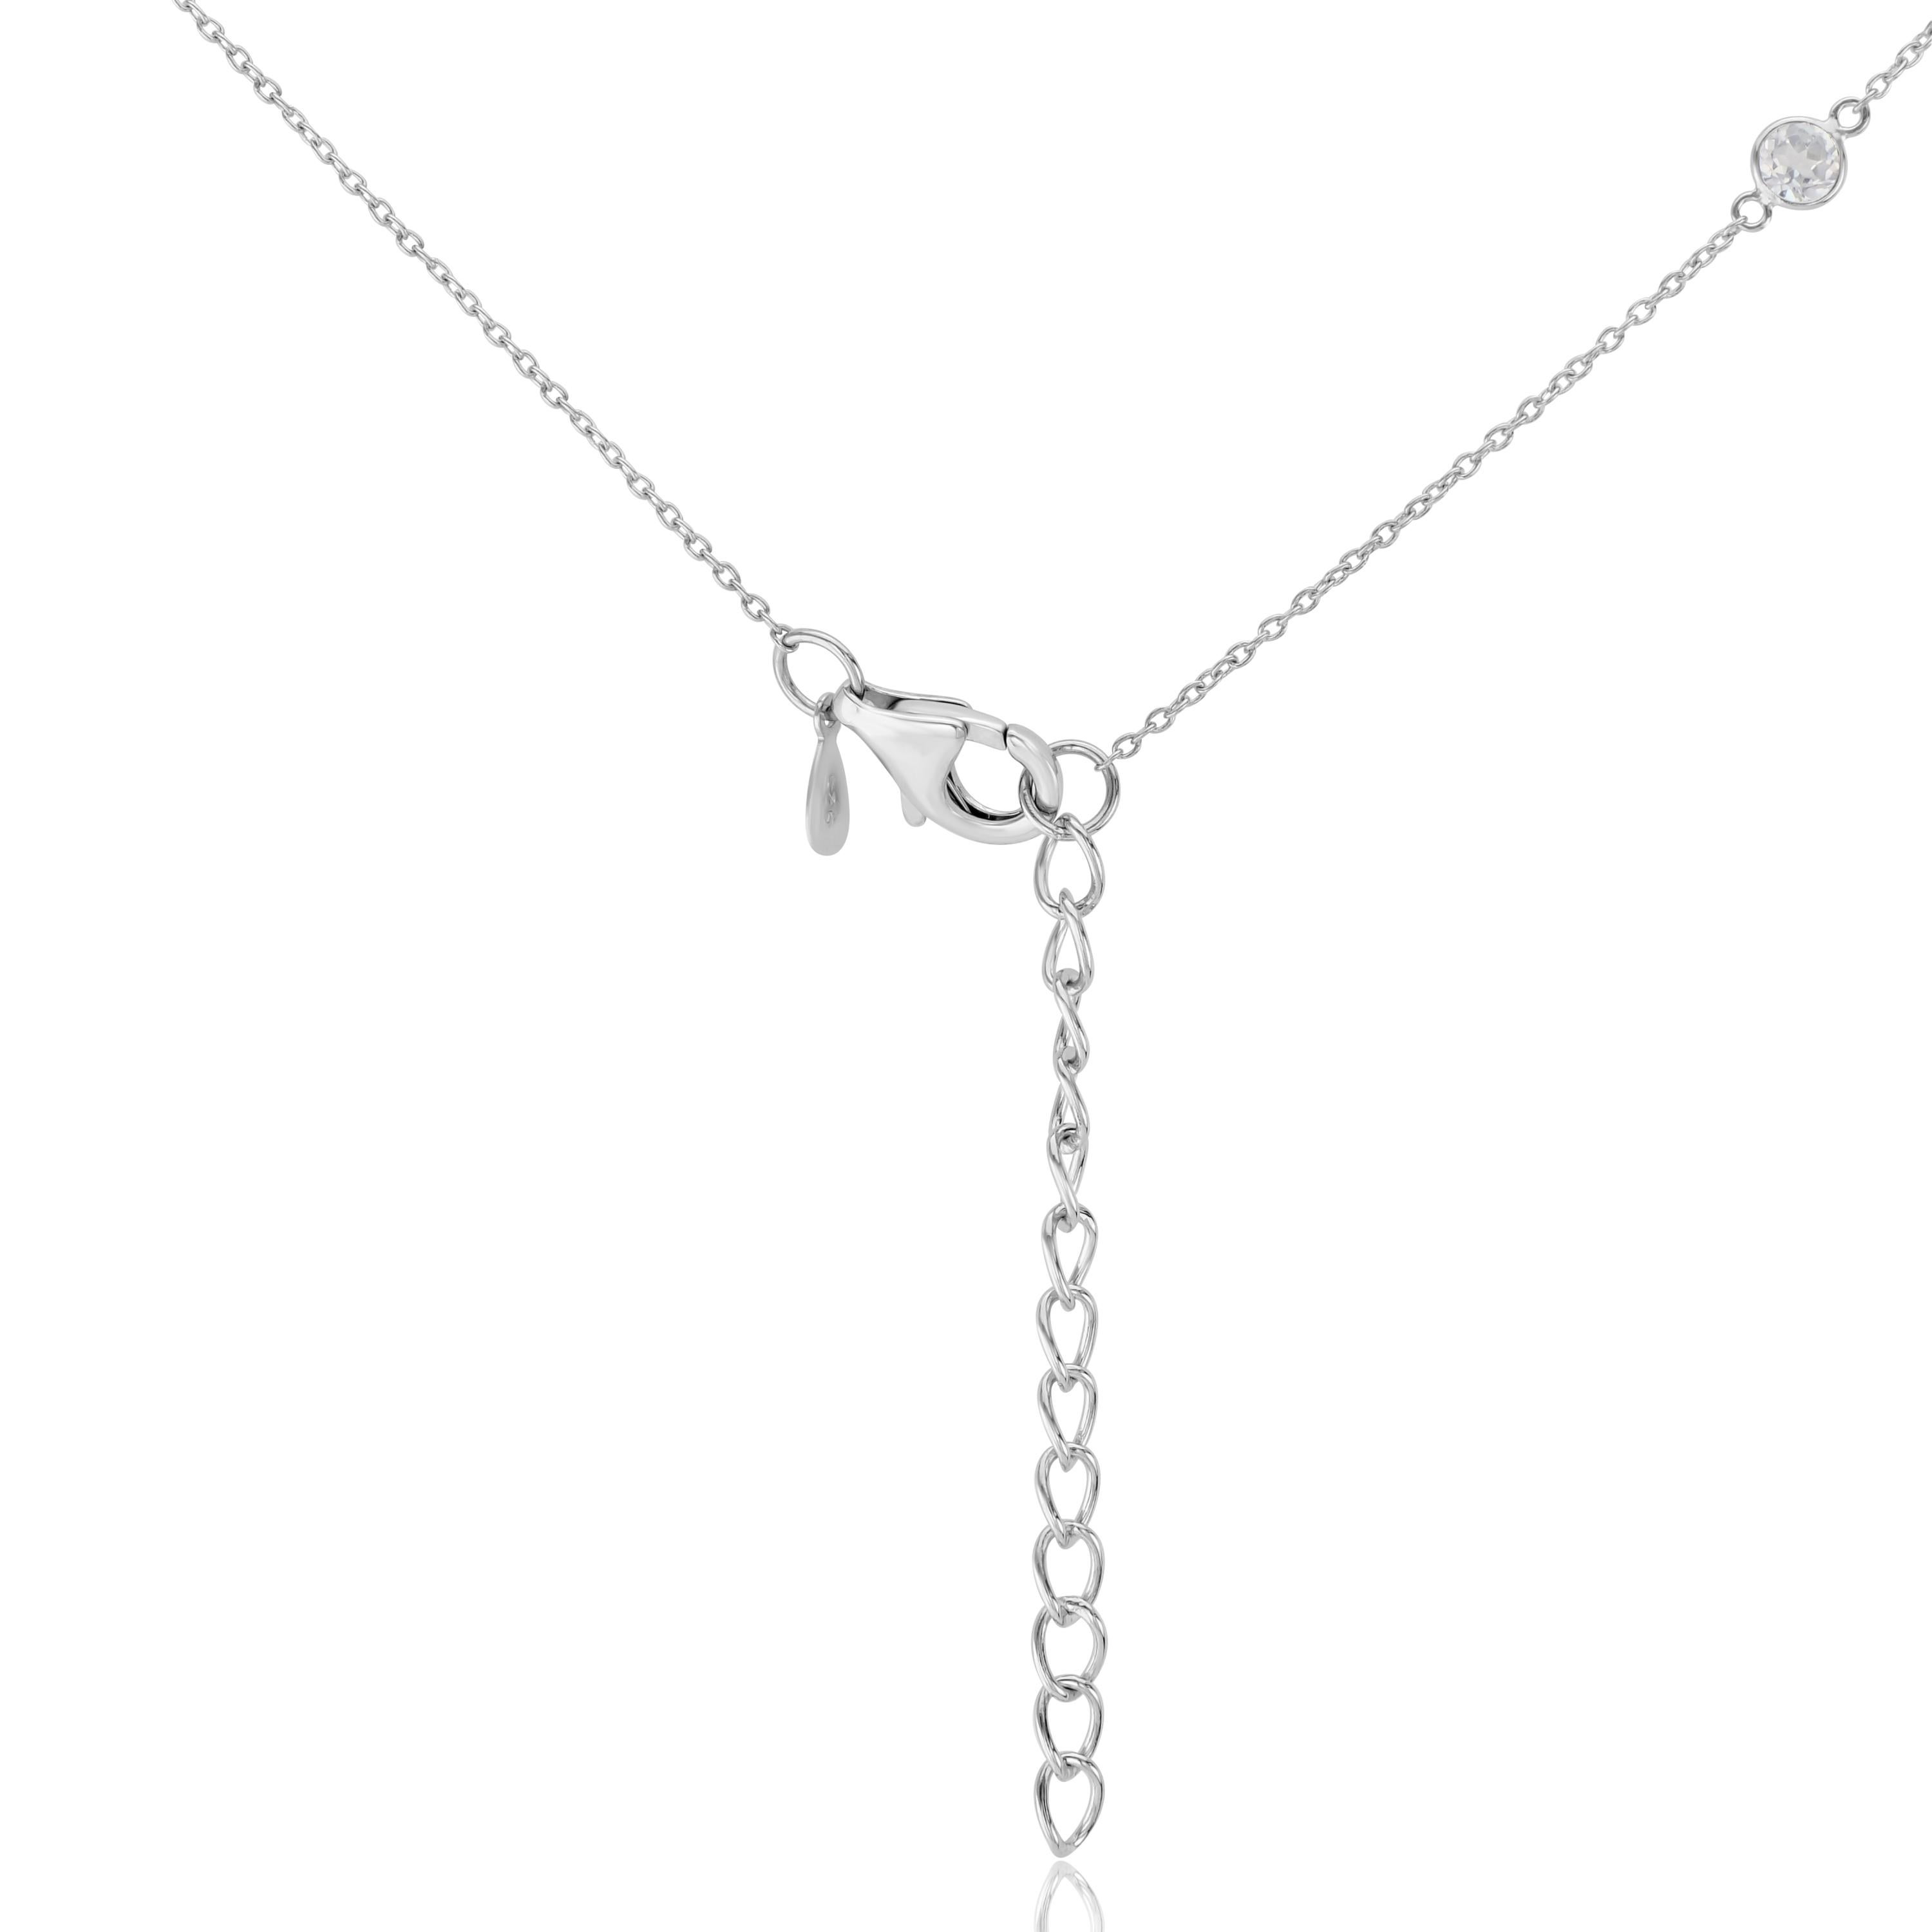 Pear Cut Tanzanite and White Topaz Pendant Necklace in Sterling Silver